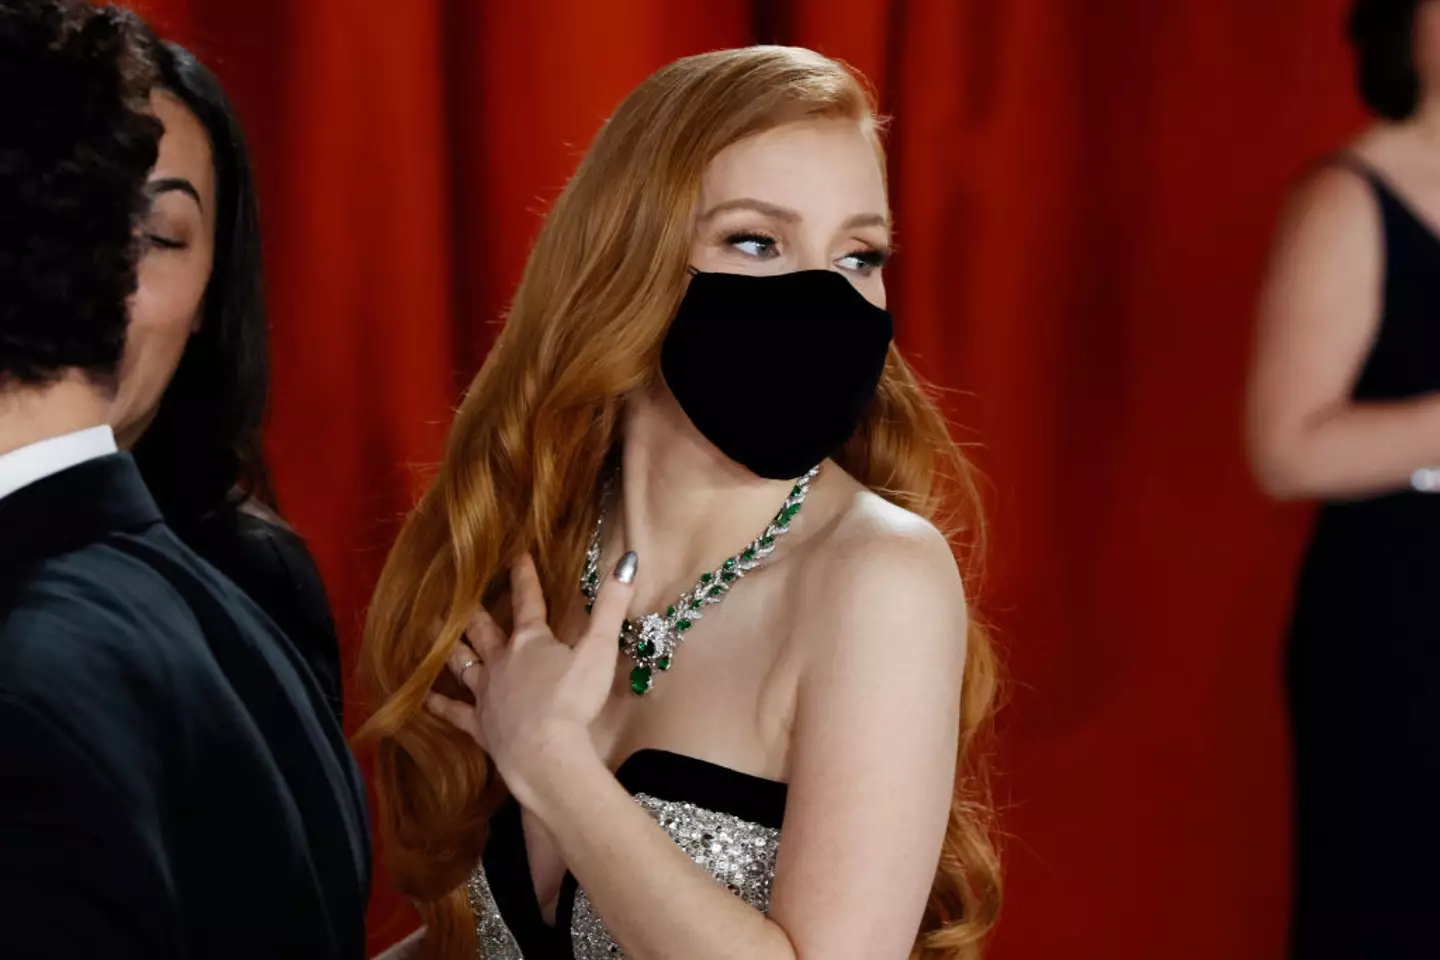 Jessica Chastain has continued to wear masks for award shows long after Covid anxieties eased.